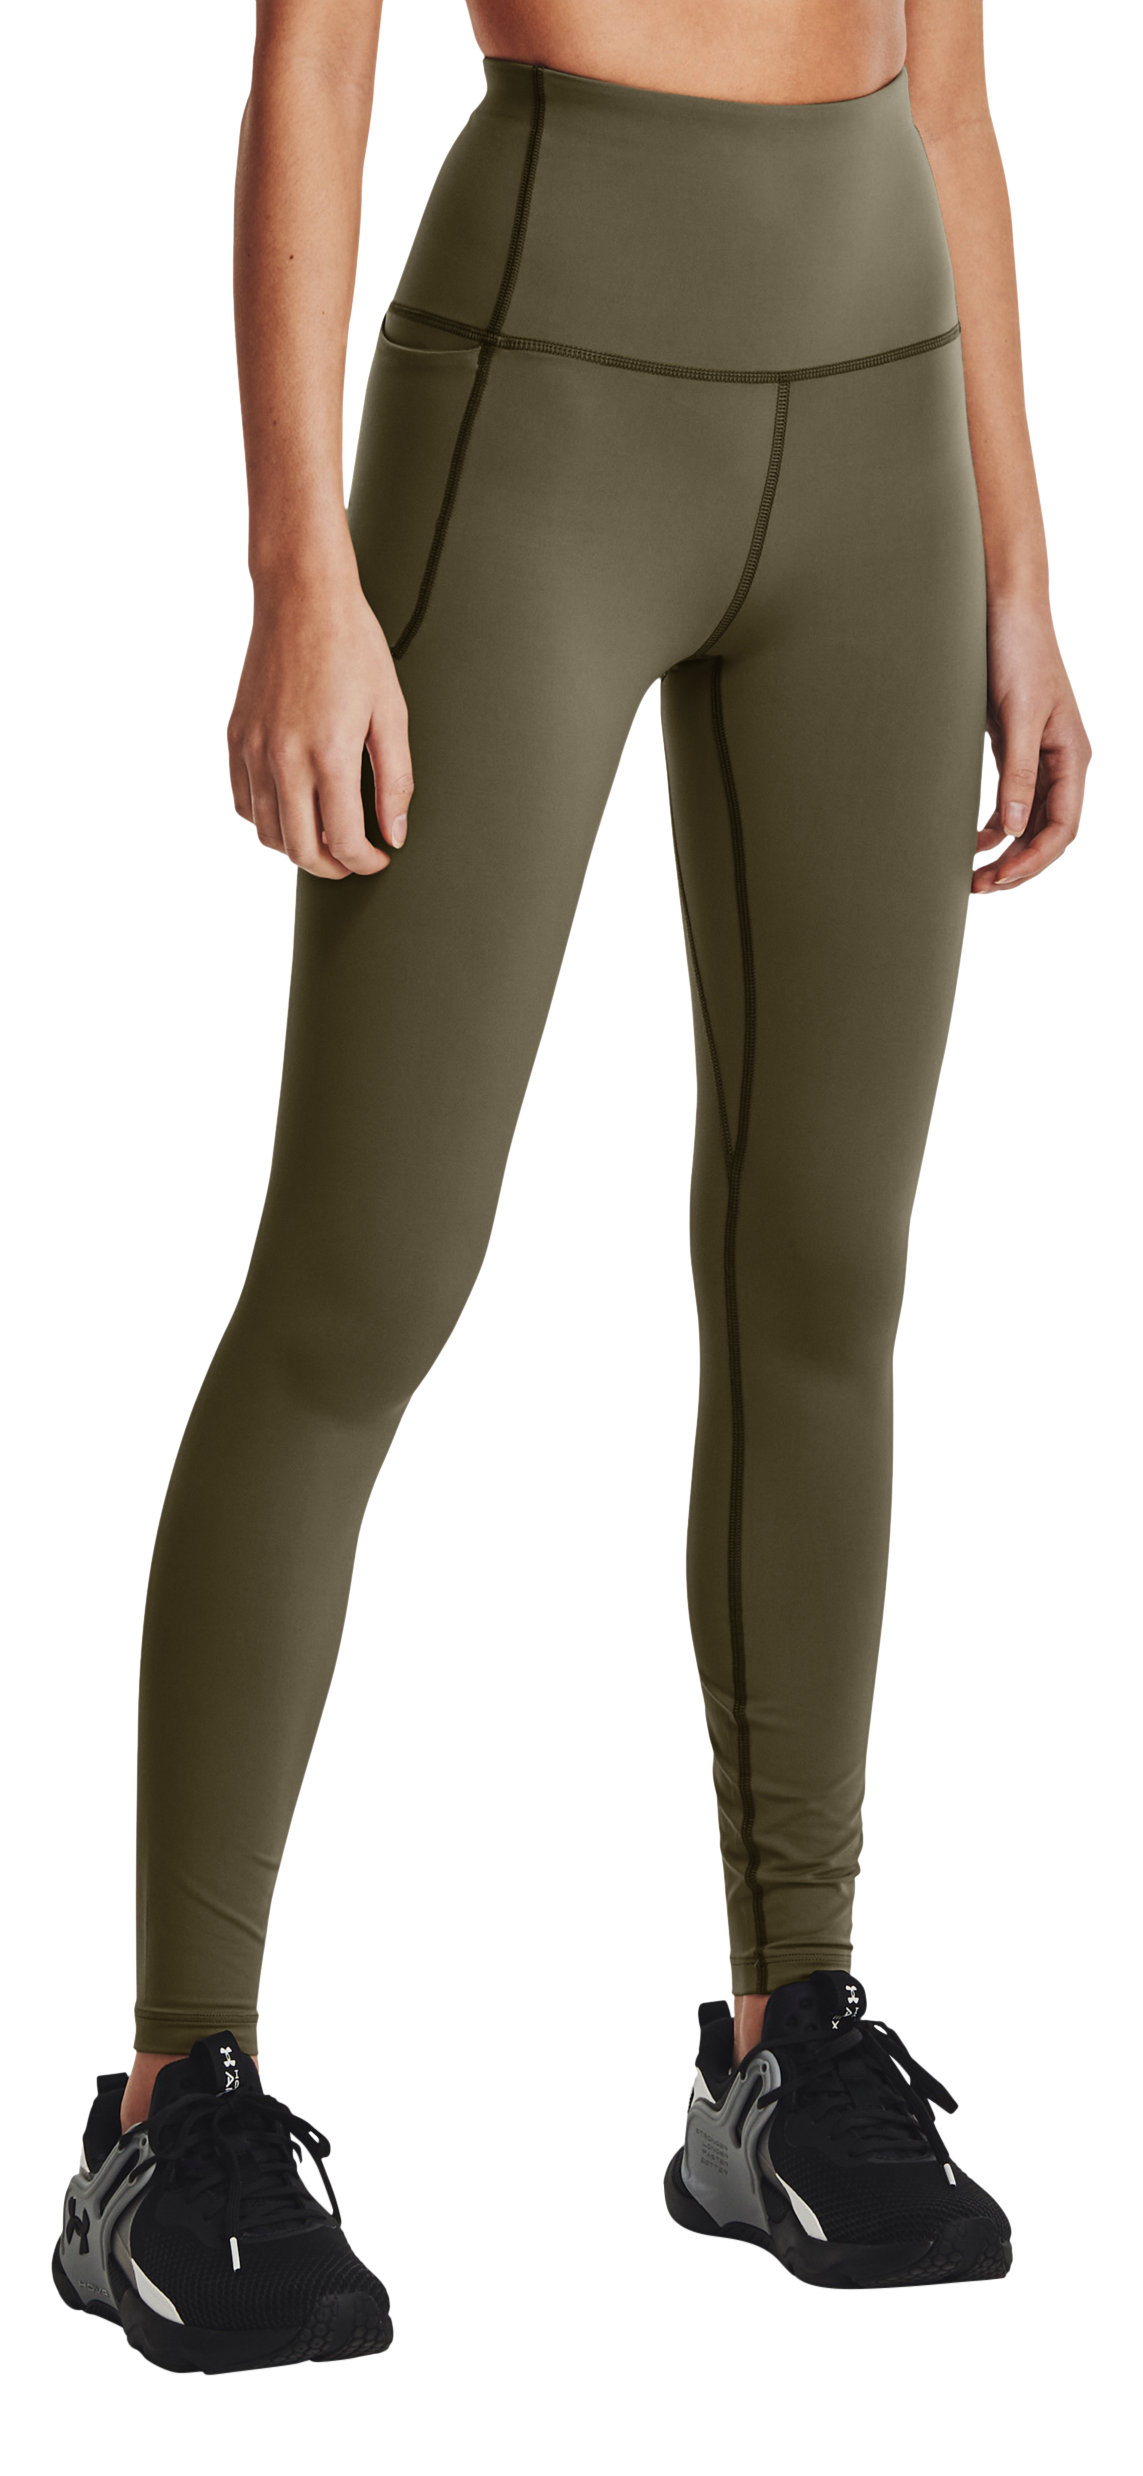 Under Armour Meridian Ultra High Rise Leggings for Ladies - Tent/Metallic Silver - XS